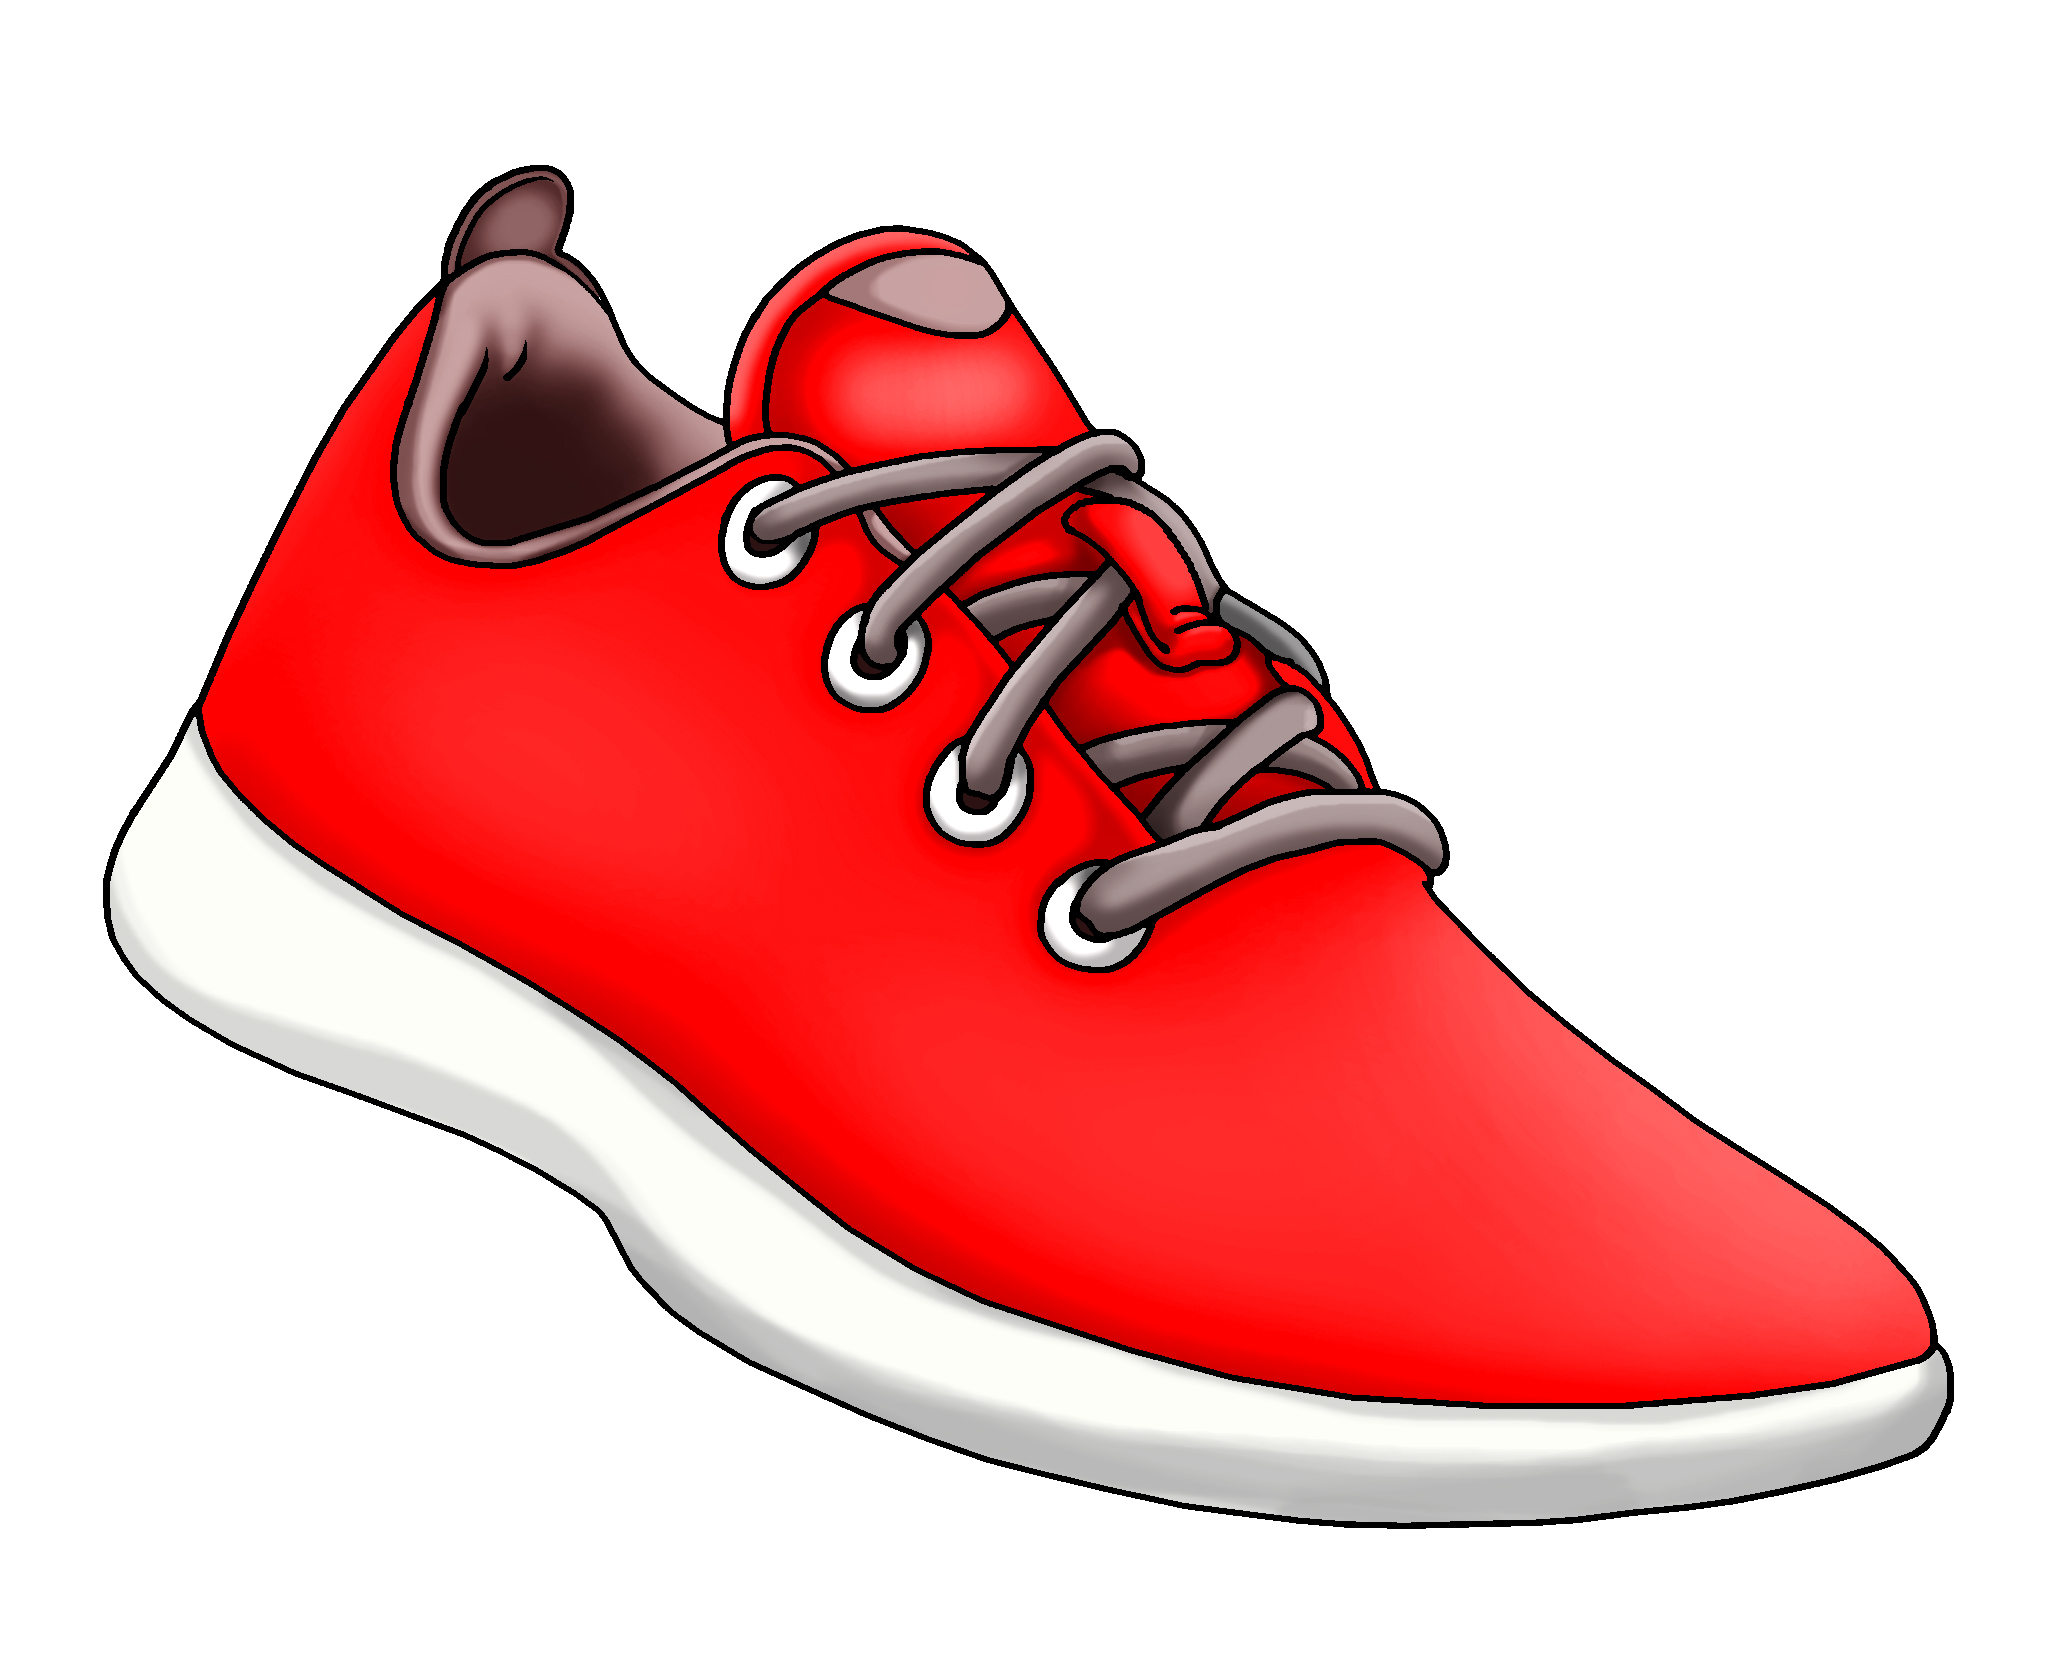 red shoe illustration clipart